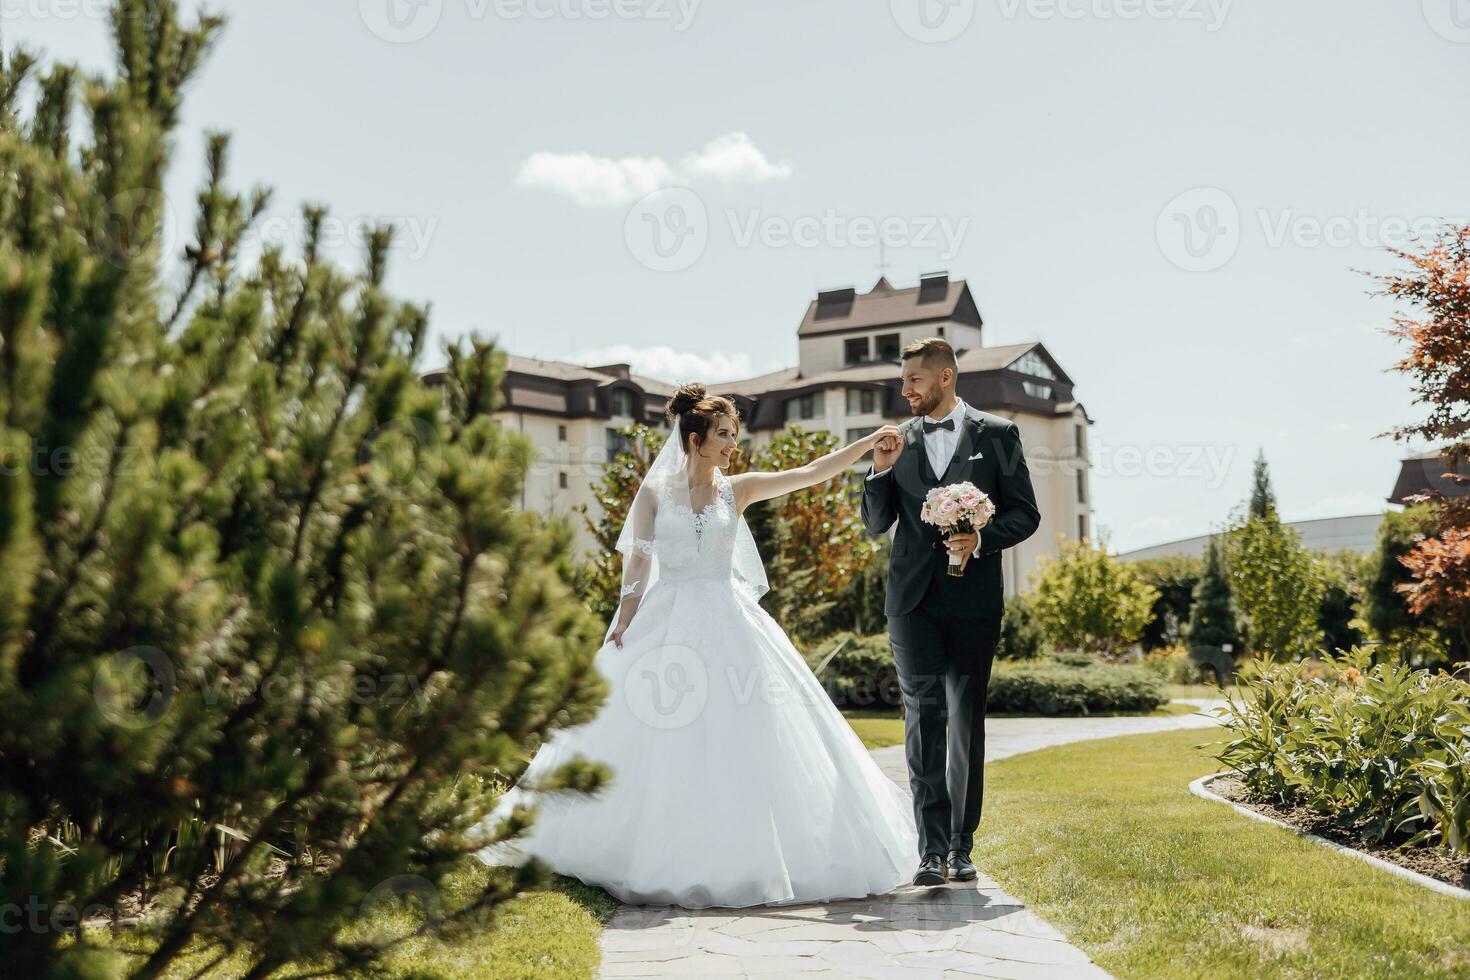 Happy husband and wife. Wedding day. Beautiful nature. Walk during the photo session. They smile at each other. Holding hands.